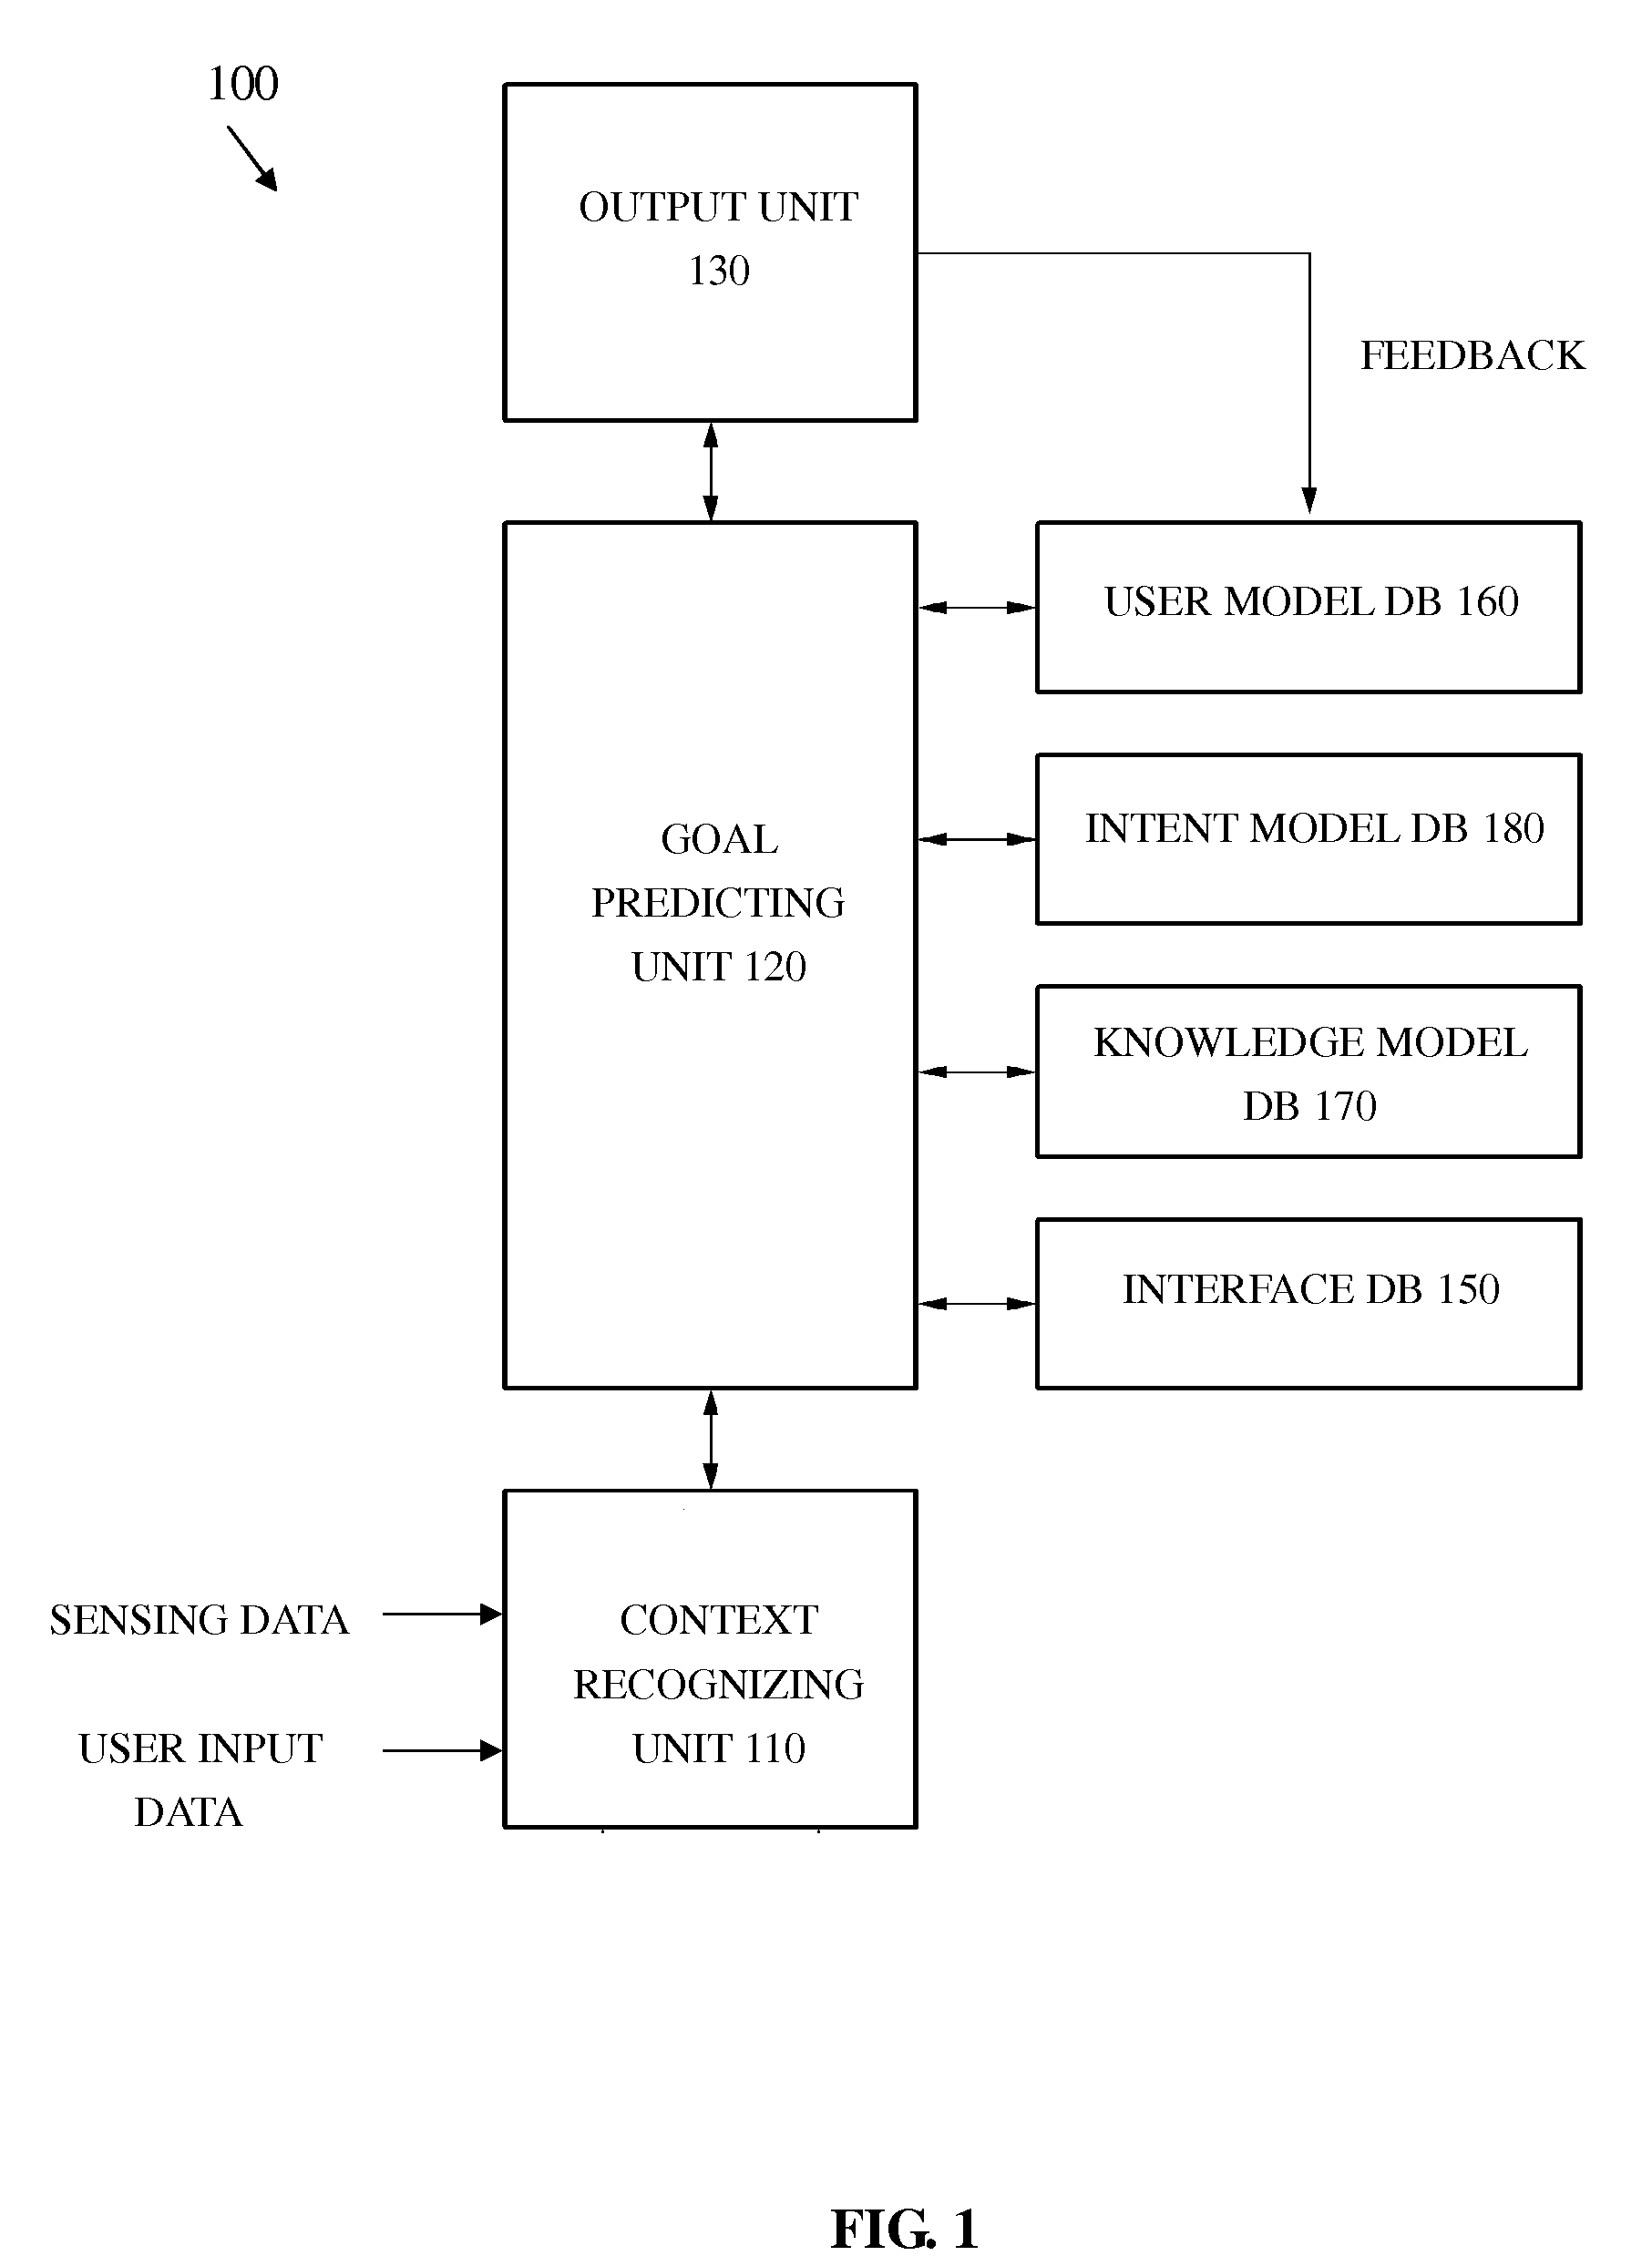 Apparatus and method for providing goal predictive interface